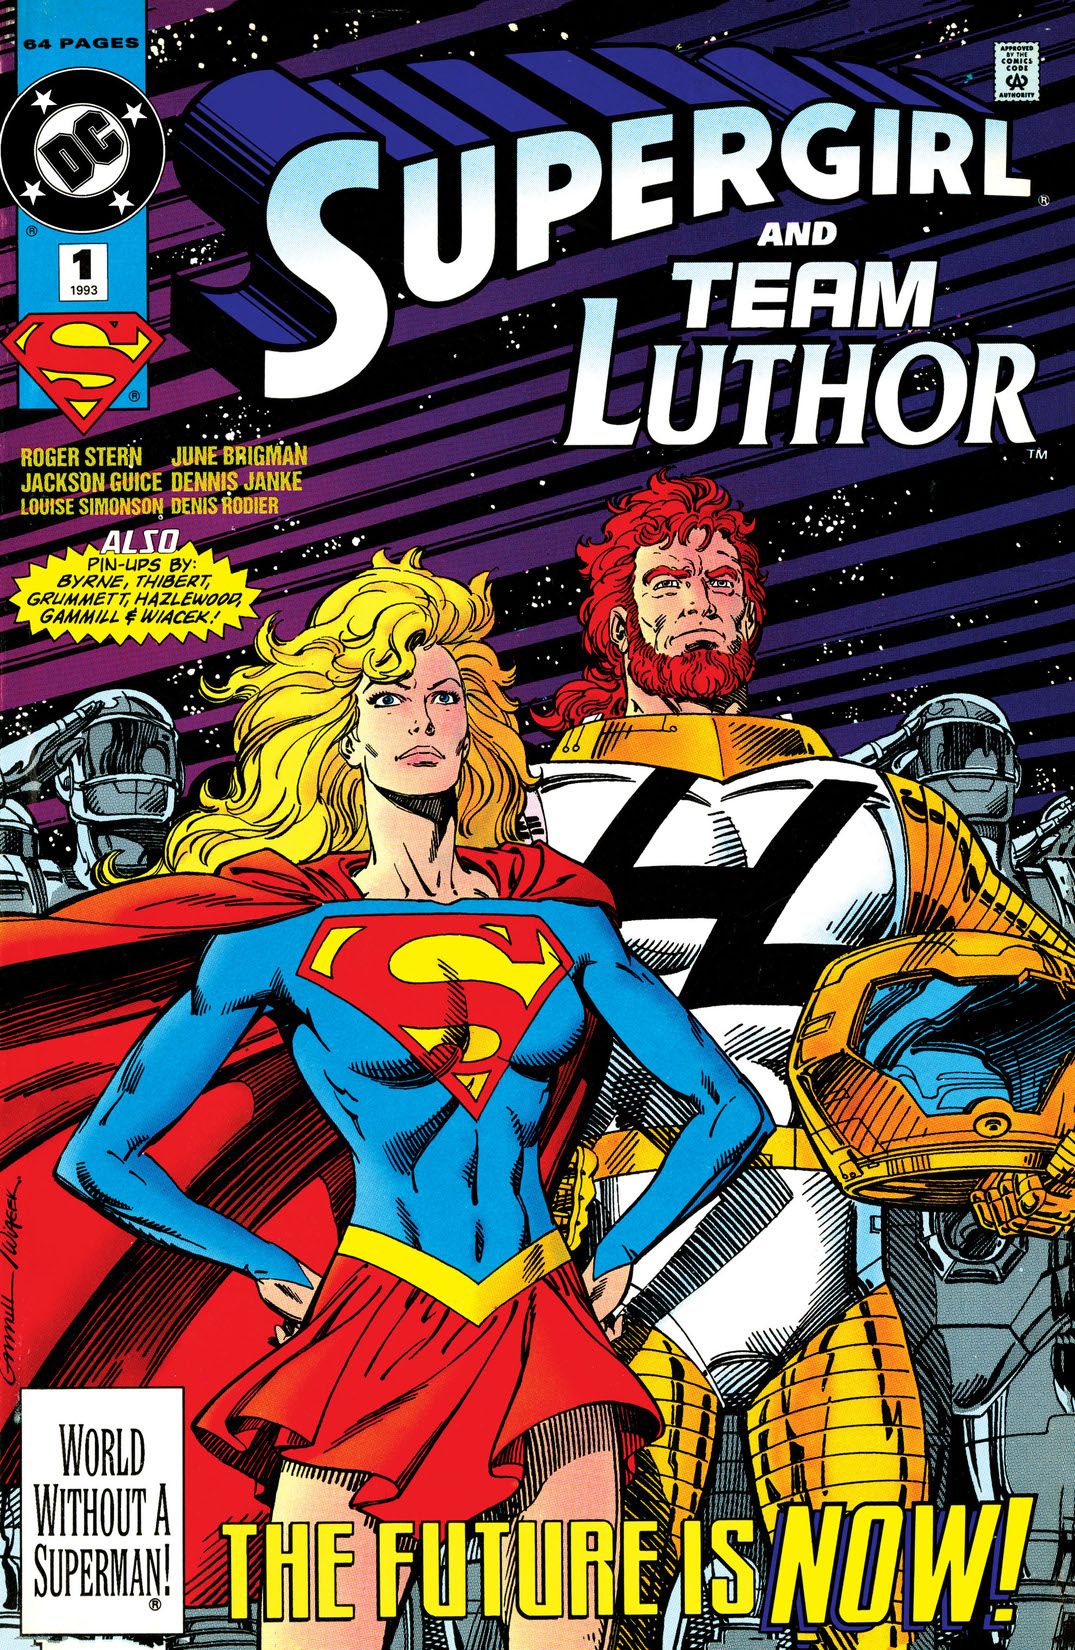 The cover of Supergirl and Team Luthor #1